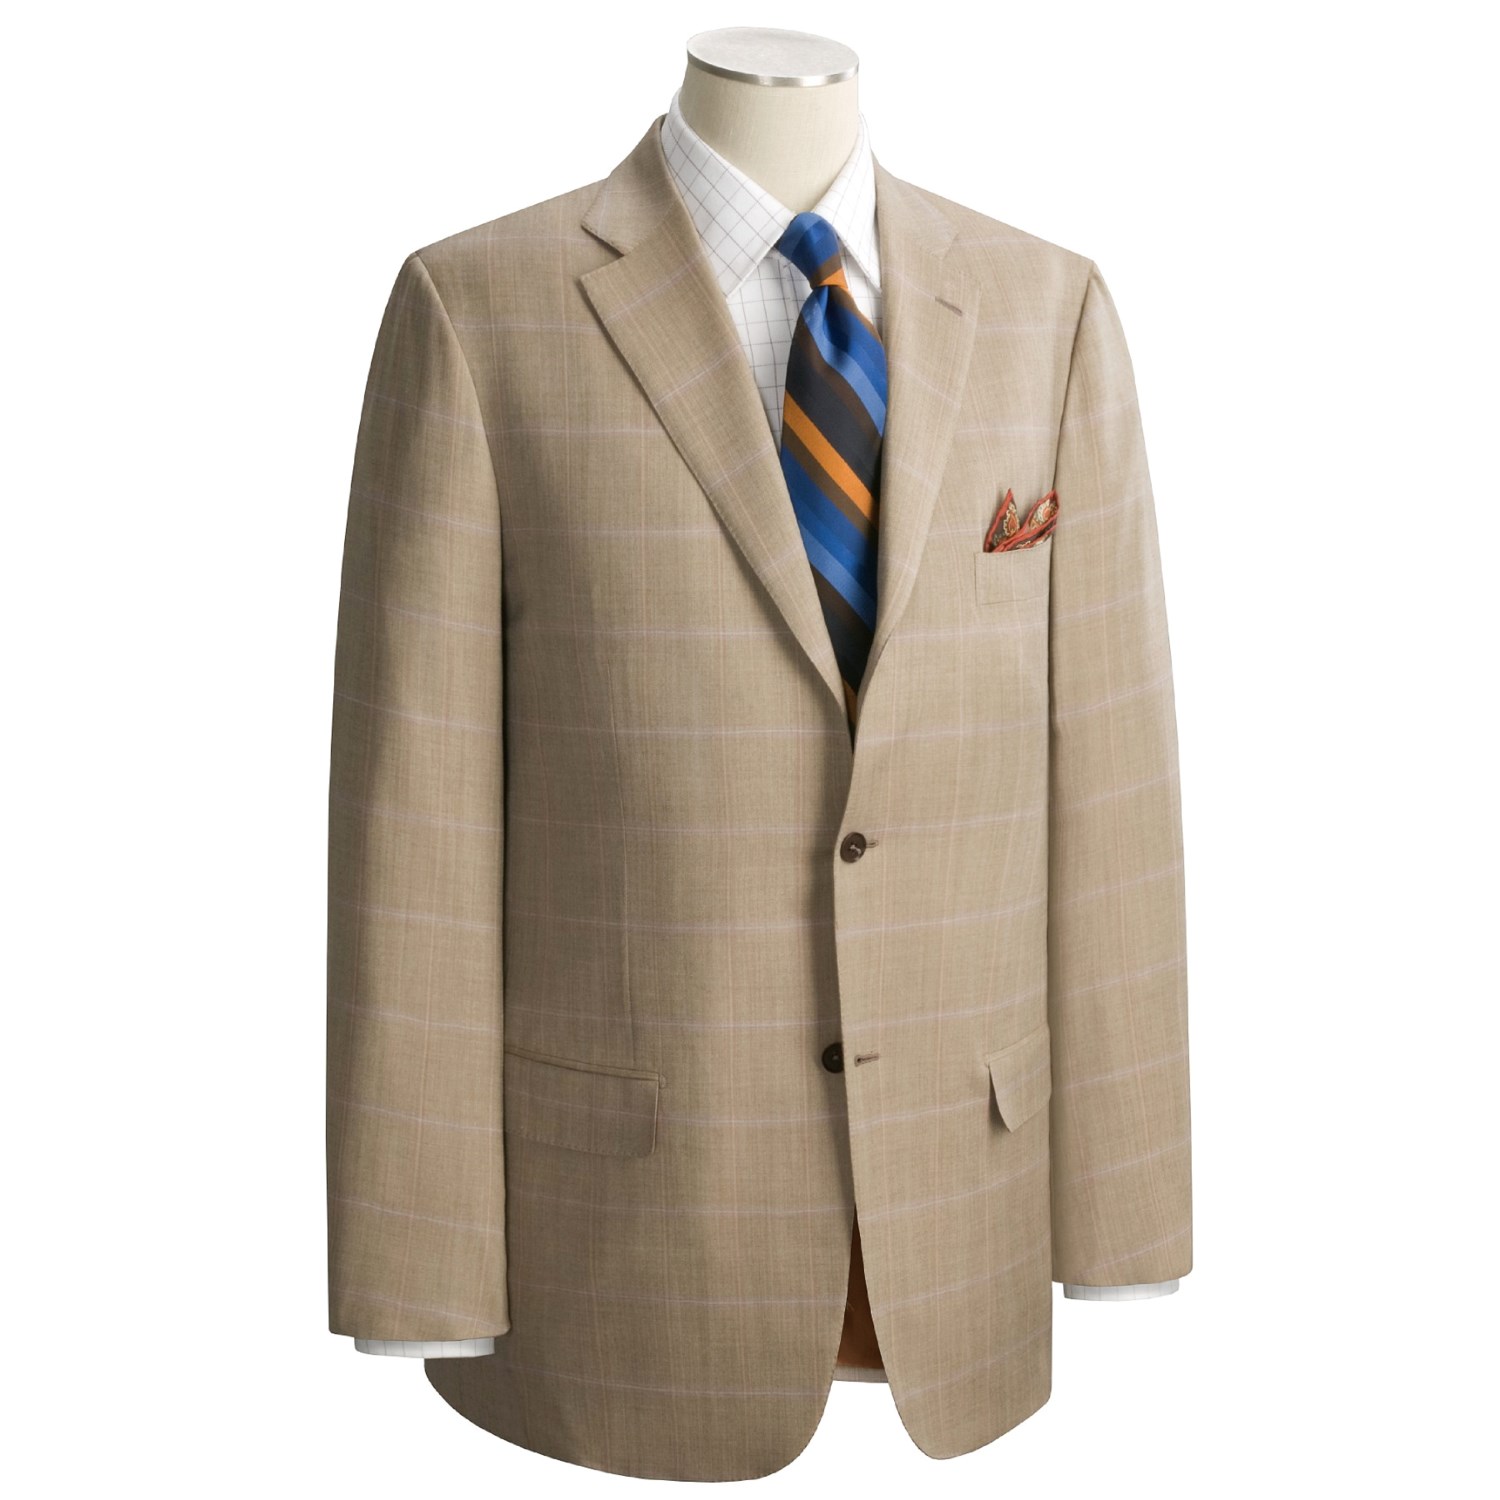 Isaia Tan Windowpane Suit (For Men) 87678 - Save 64%